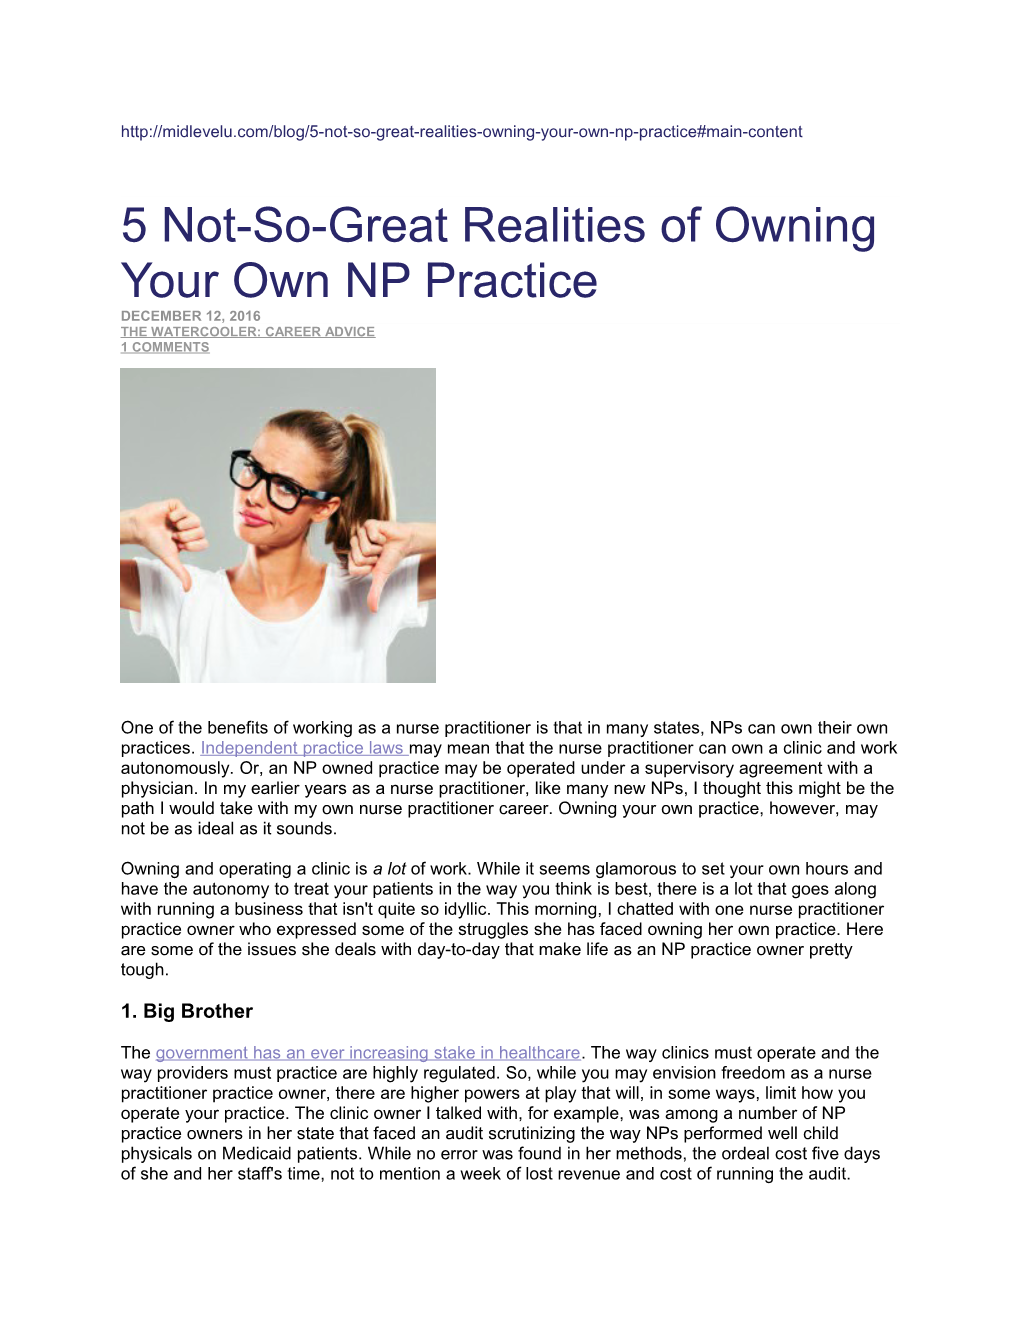 5 Not-So-Great Realities of Owning Your Own NP Practice